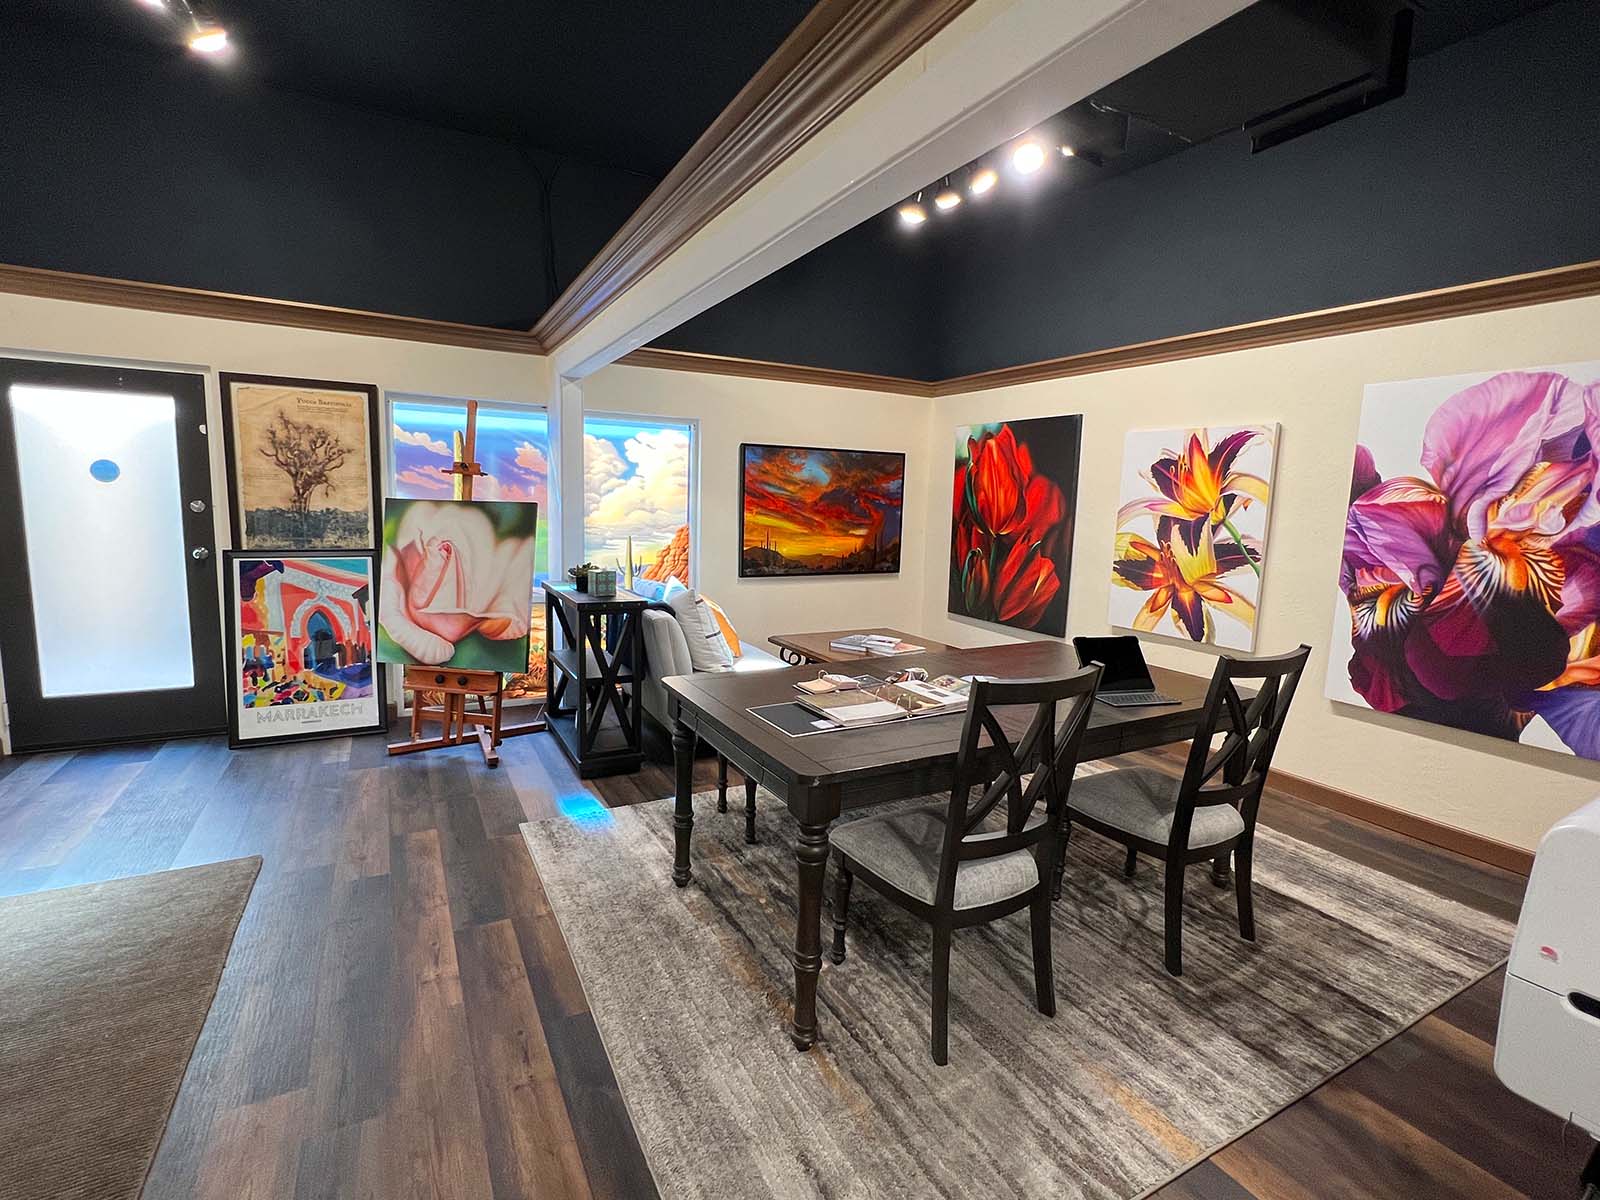 Muzeo Art Foundry Art Gallery and Wallpaper showroom in Scottsdale, Arizona.  Here you can browse our walls or from a catalog collection of artwork and wallpaper.